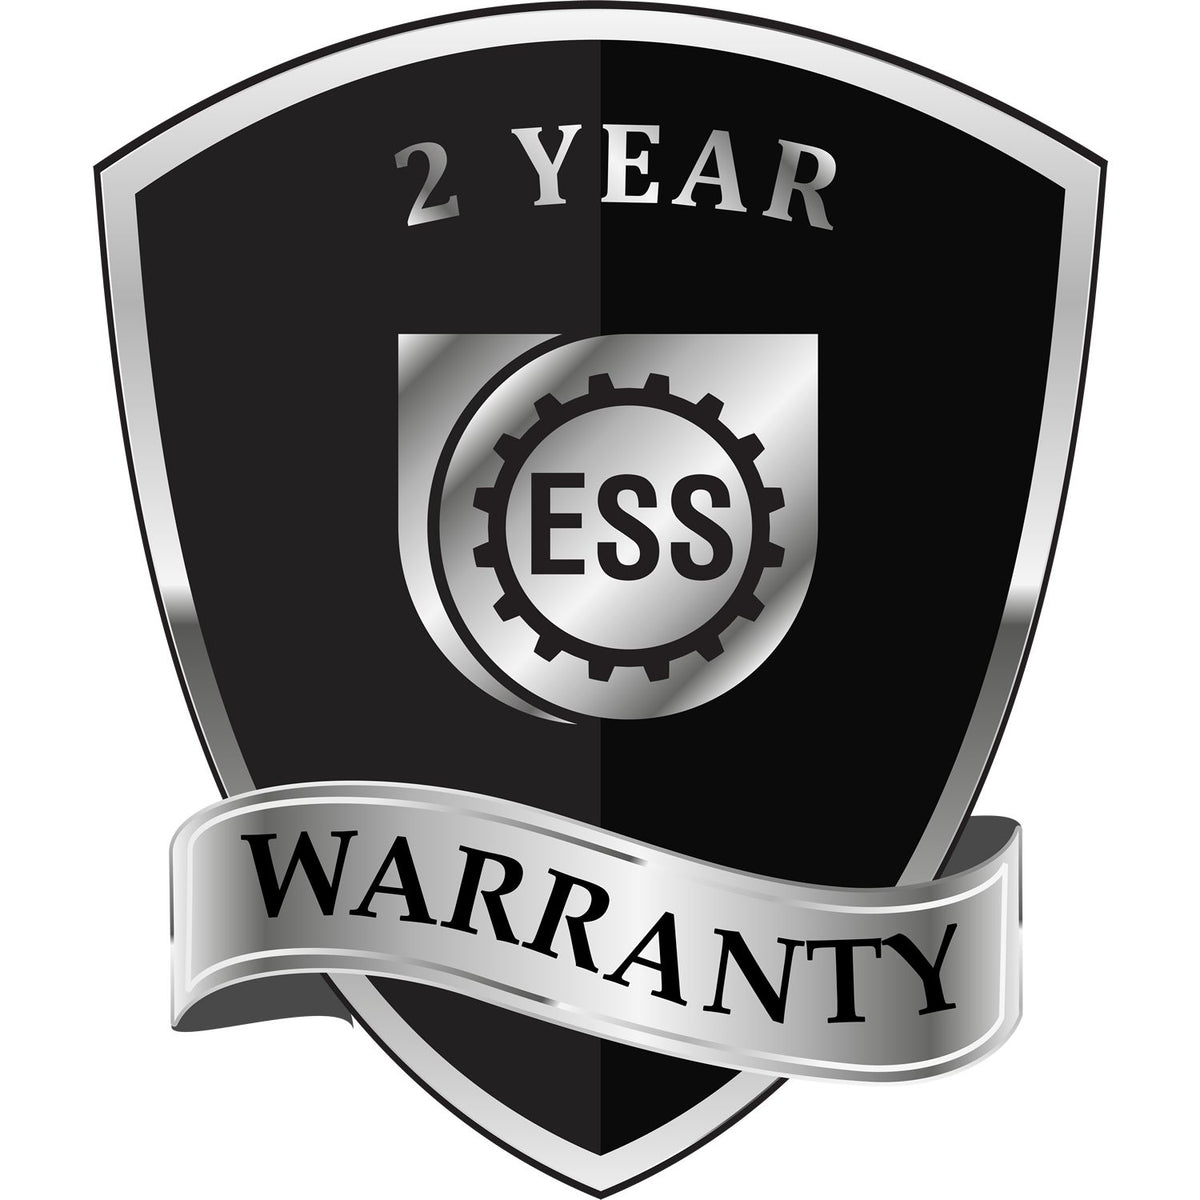 A badge or emblem showing a warranty icon for the Guam Engineer Desk Seal